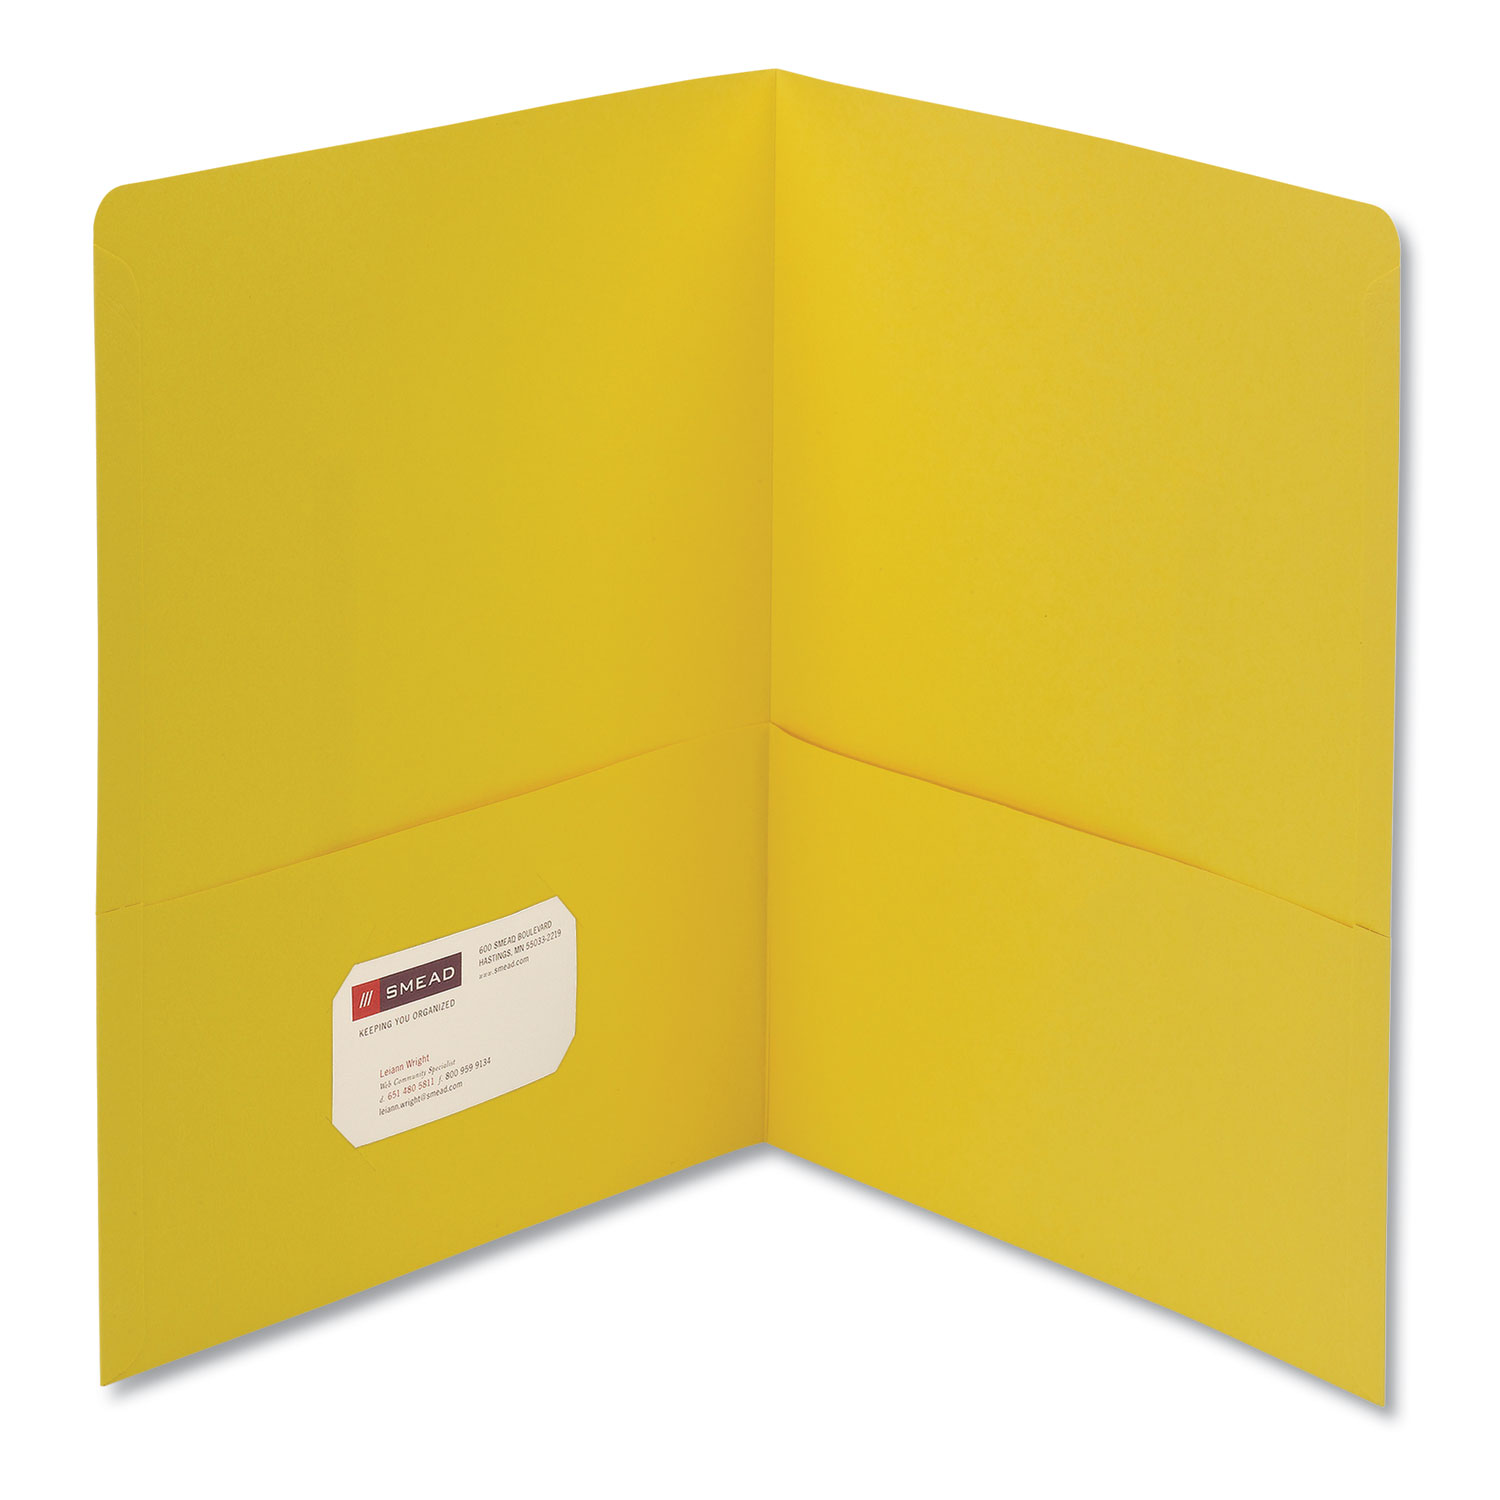  Smead 87862 Two-Pocket Folder, Textured Paper, Yellow, 25/Box (SMD87862) 